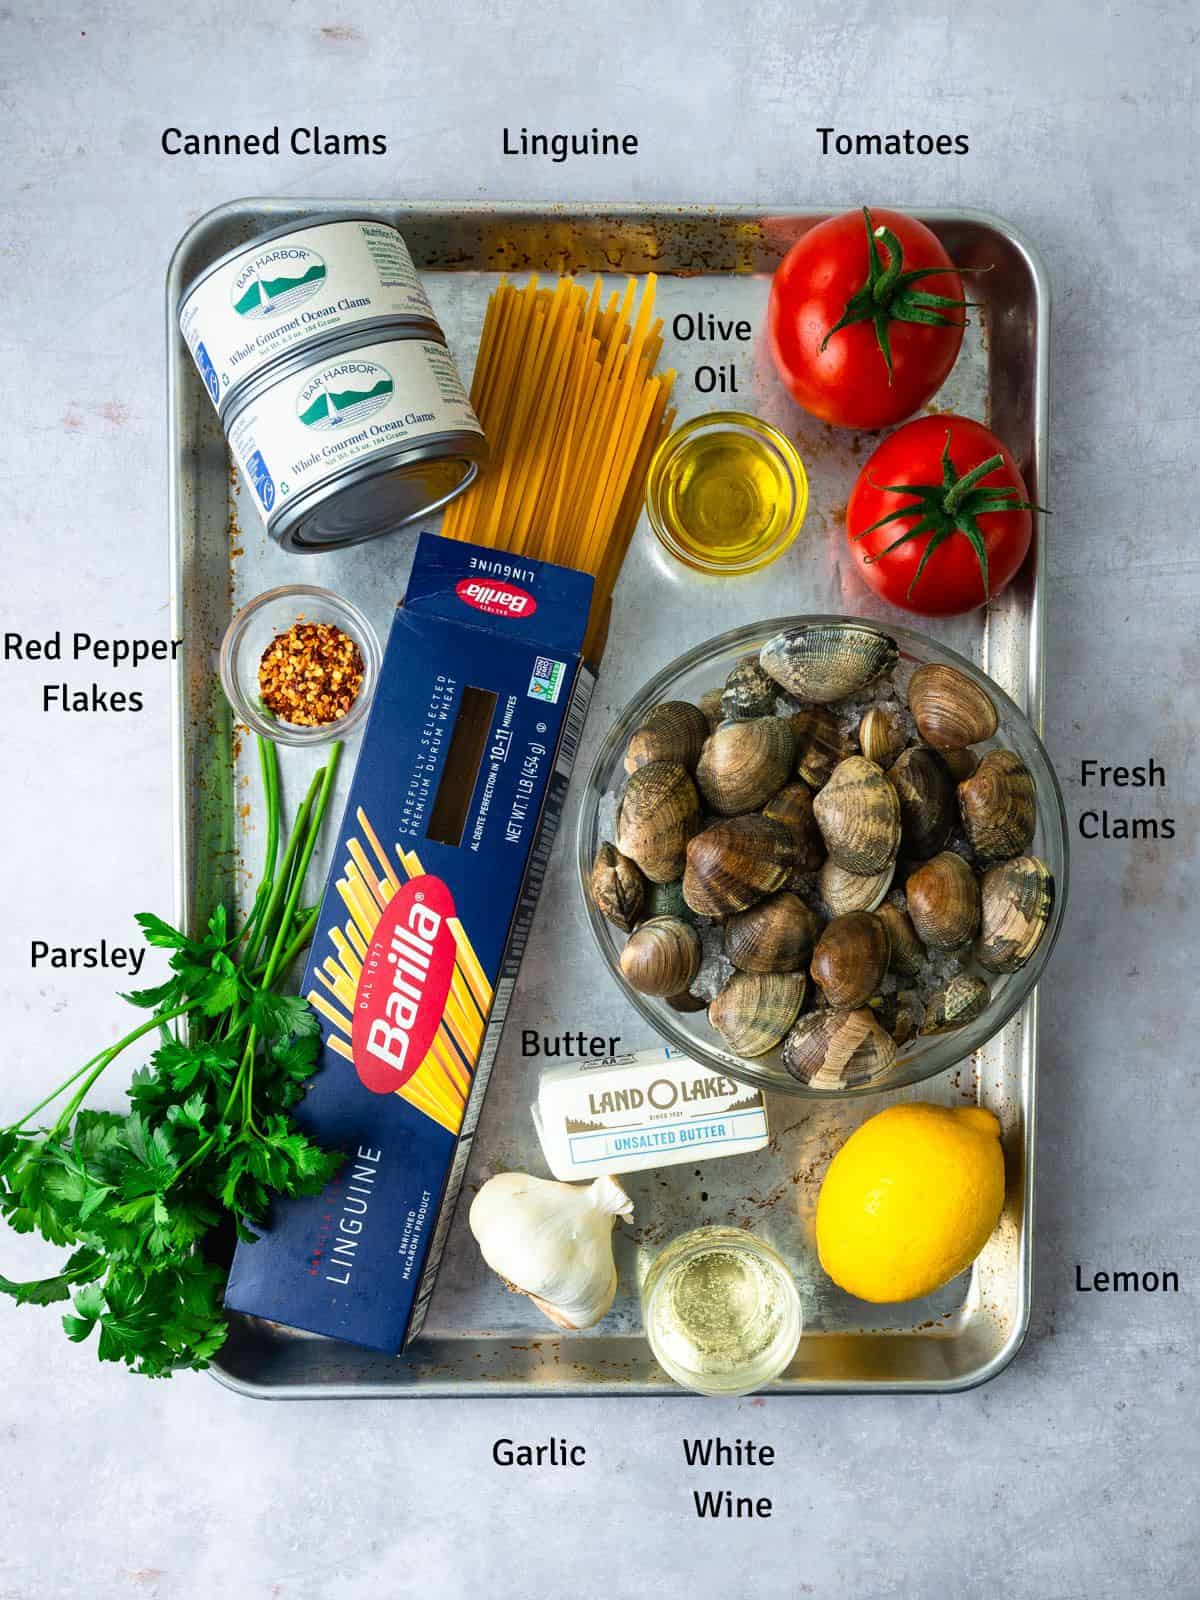 Ingredients for linguine with clams, including tomatoes, canned clams and white wine.